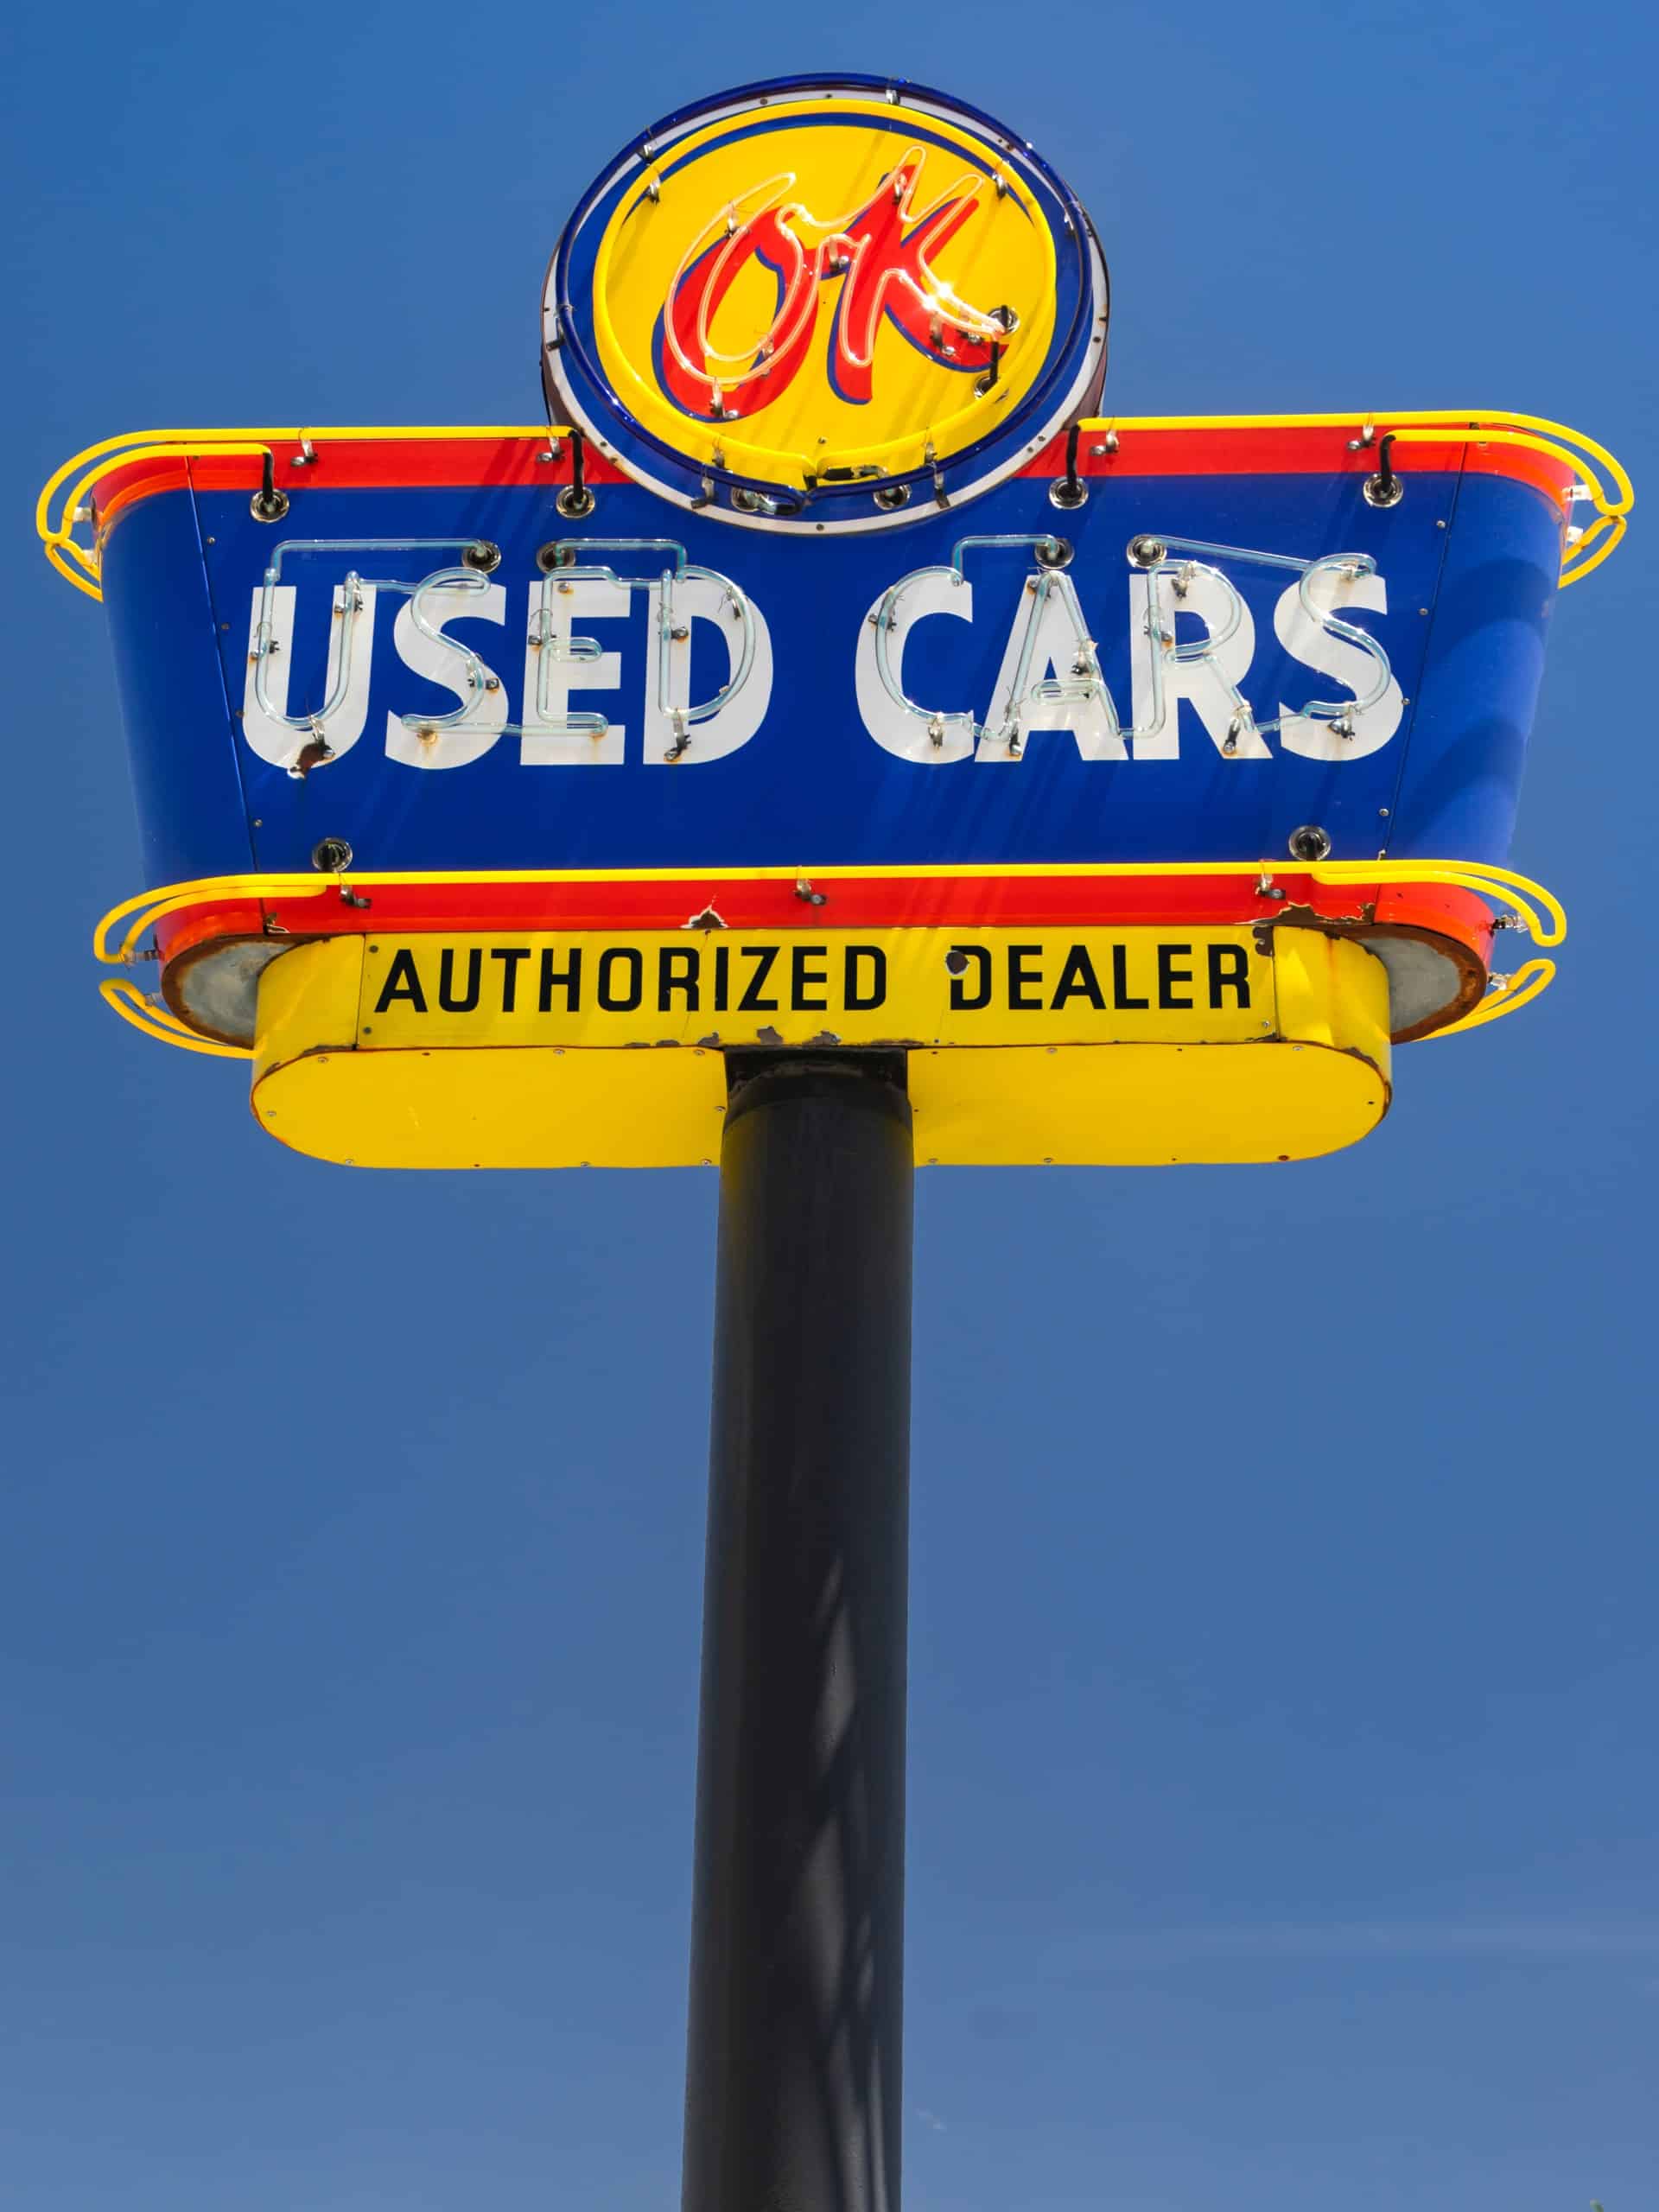 Buying Used Cars Worth Article Image